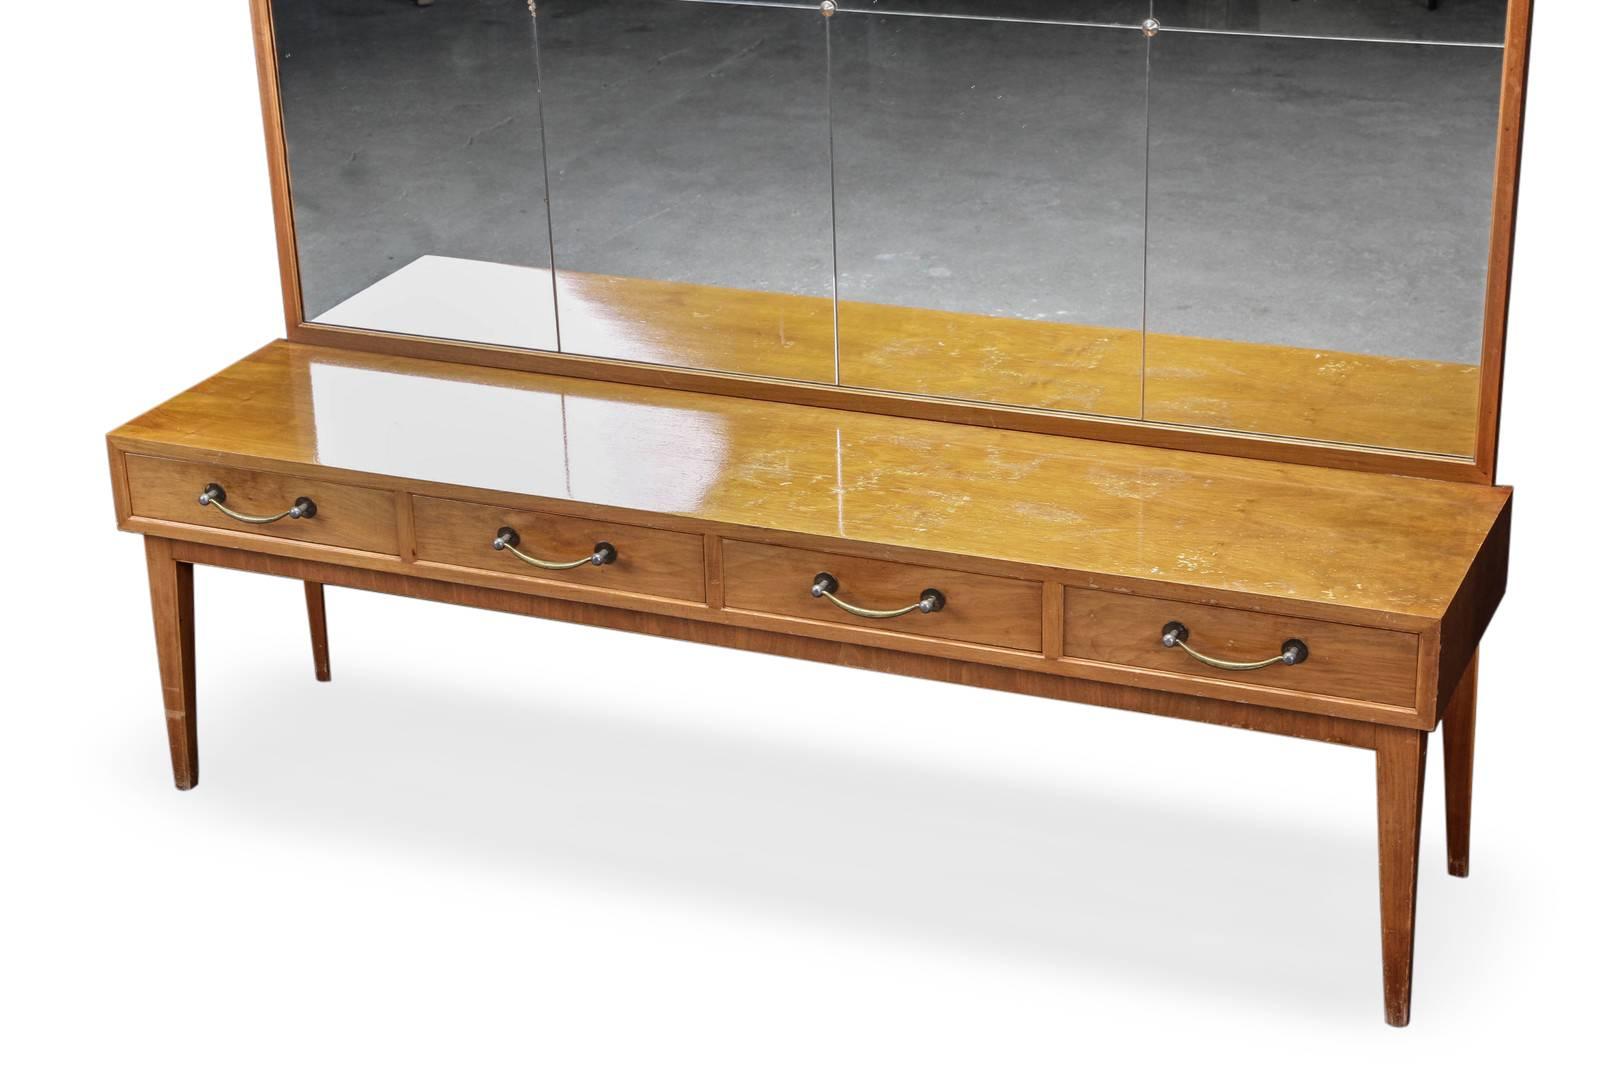 Lacquered clear wood cabinet, upper part with glass mirror divided into 12 squares. Lower part of the cabinet with four drawers, tapered legs. Brass handles.
Measures: H 180, B 146, D 38 cm.
Signs of wear.